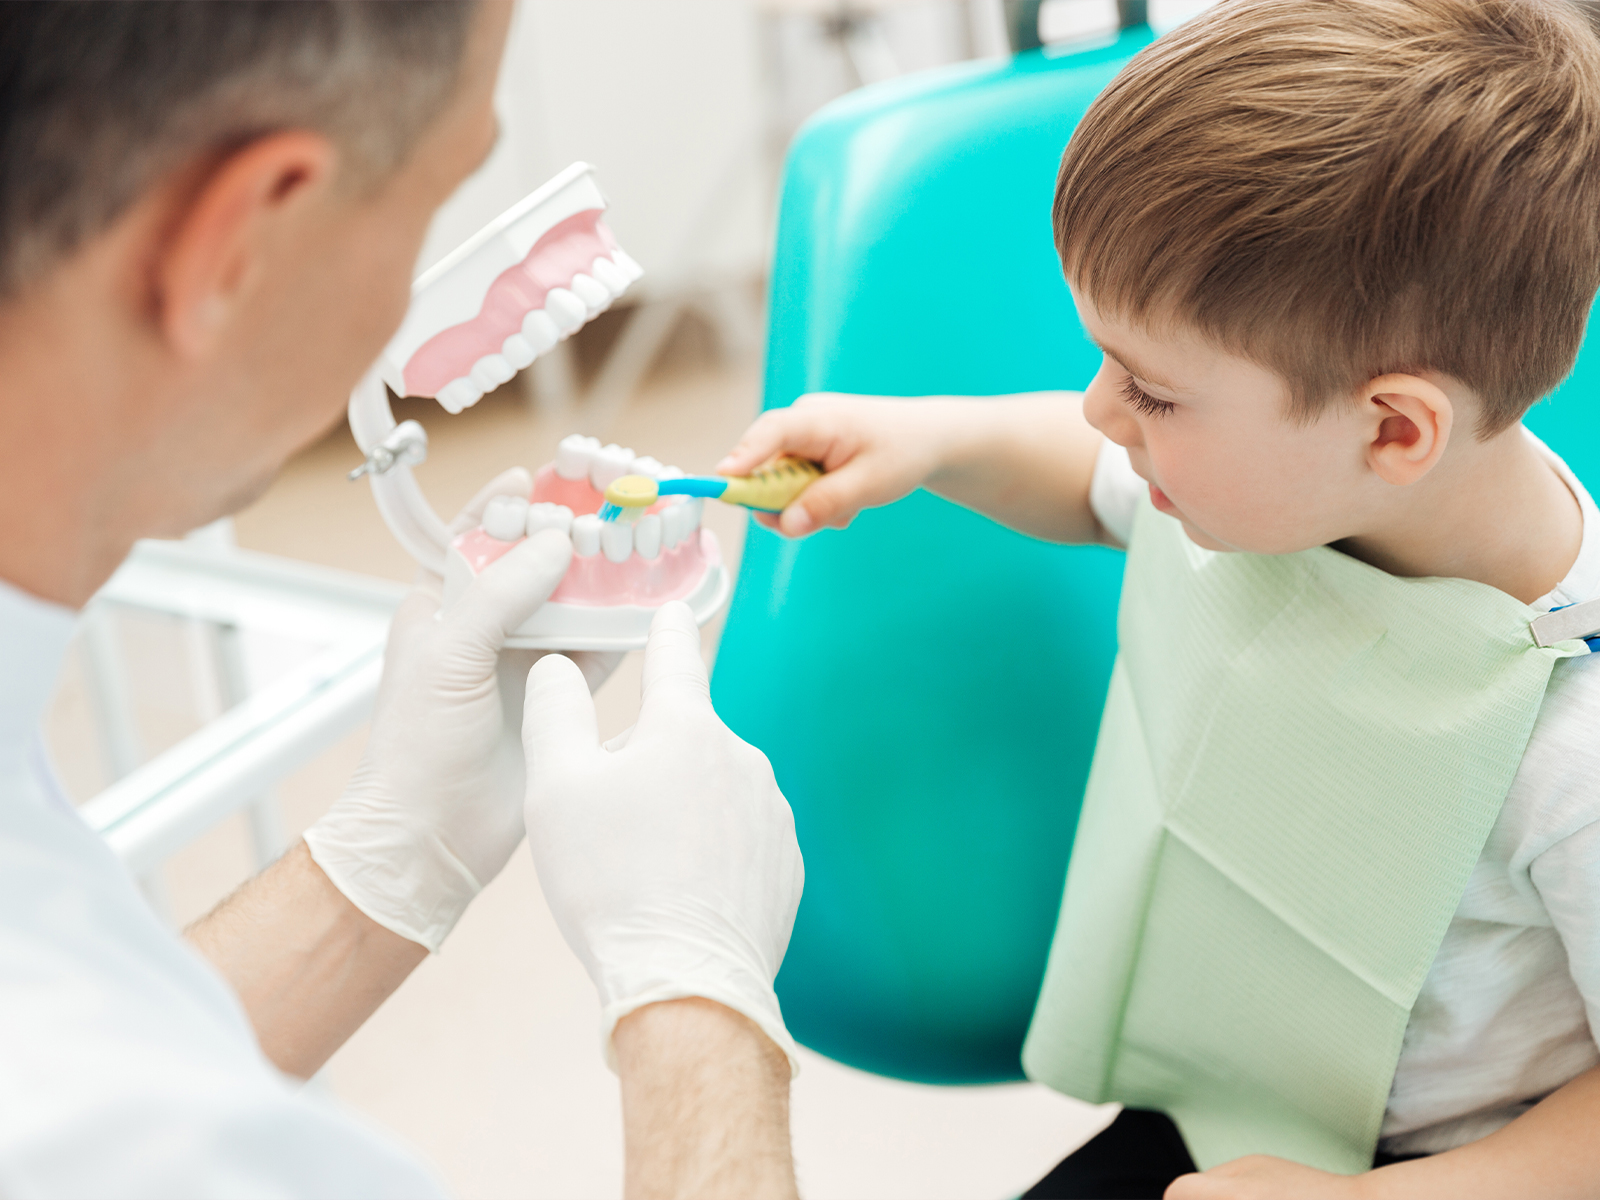 It is important to routinely monitor children's dental health, so we recommend regular visits to the dentist.